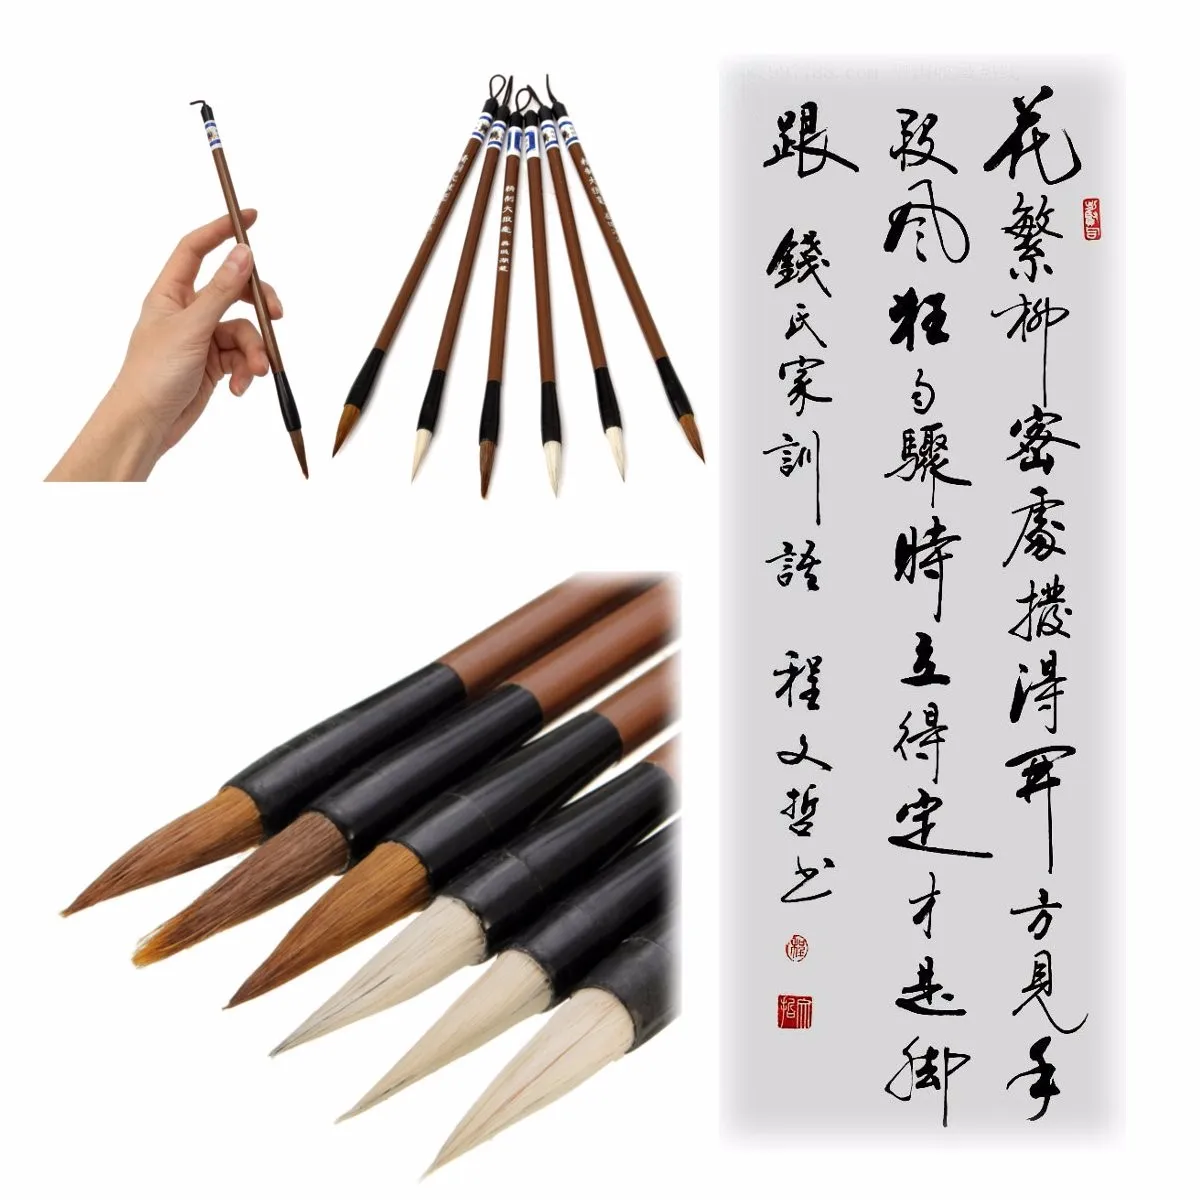 

6pcs Chinese Traditional Calligraphy Brush Landscape Painting Woolen Hair Pen Writing Set Art Darwing Office School Supplies